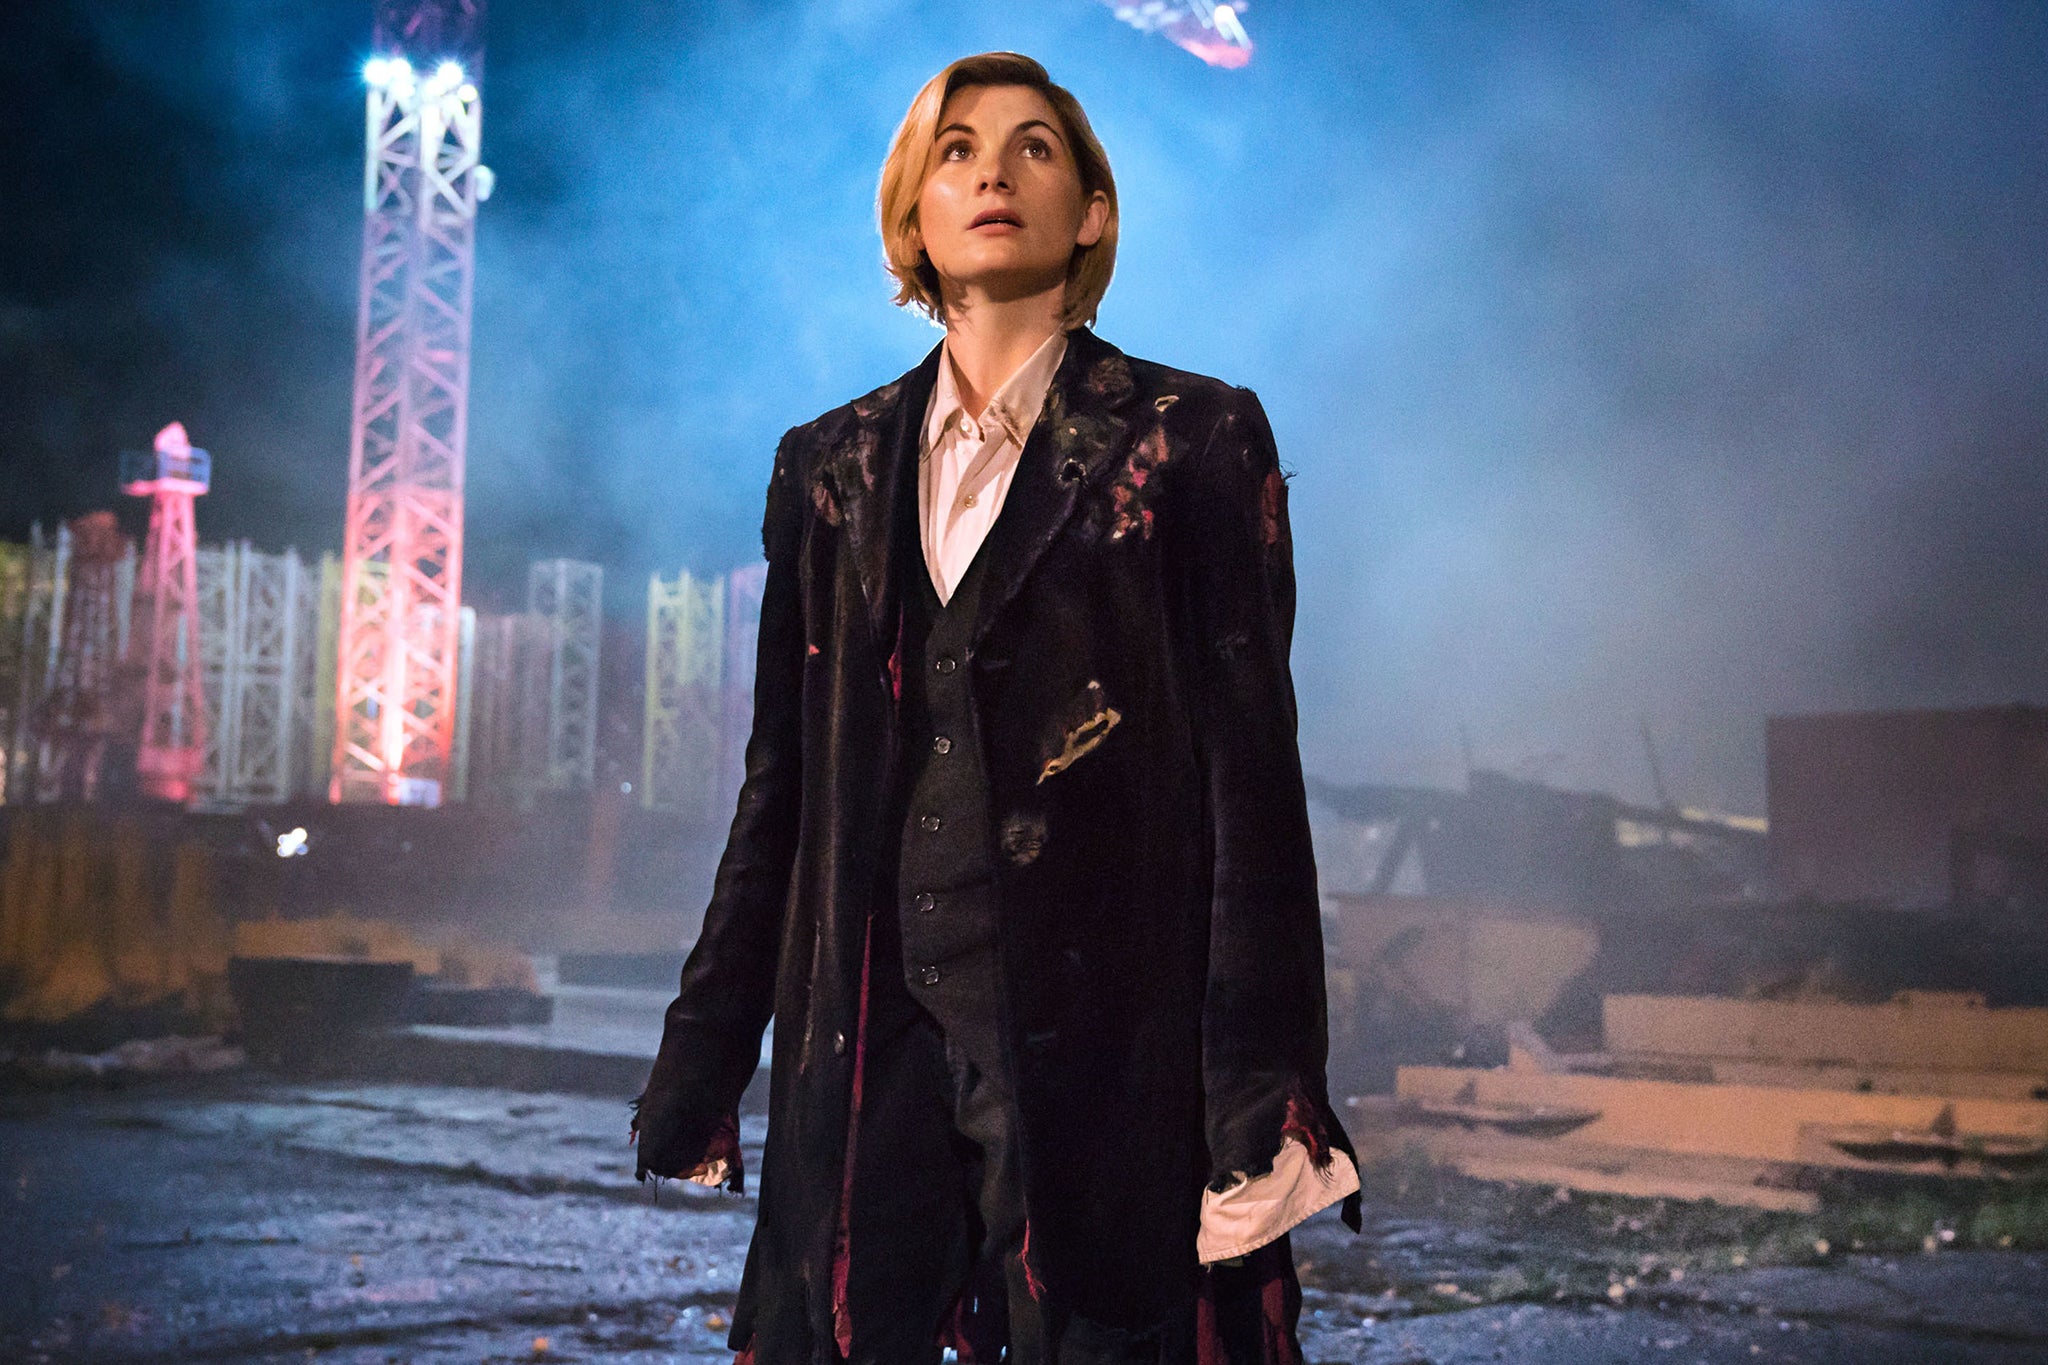 <p>Whatever your view, Whittaker inhabited the role in a way that for many will make her forever the Doctor – comic, warm, charismatic </p>